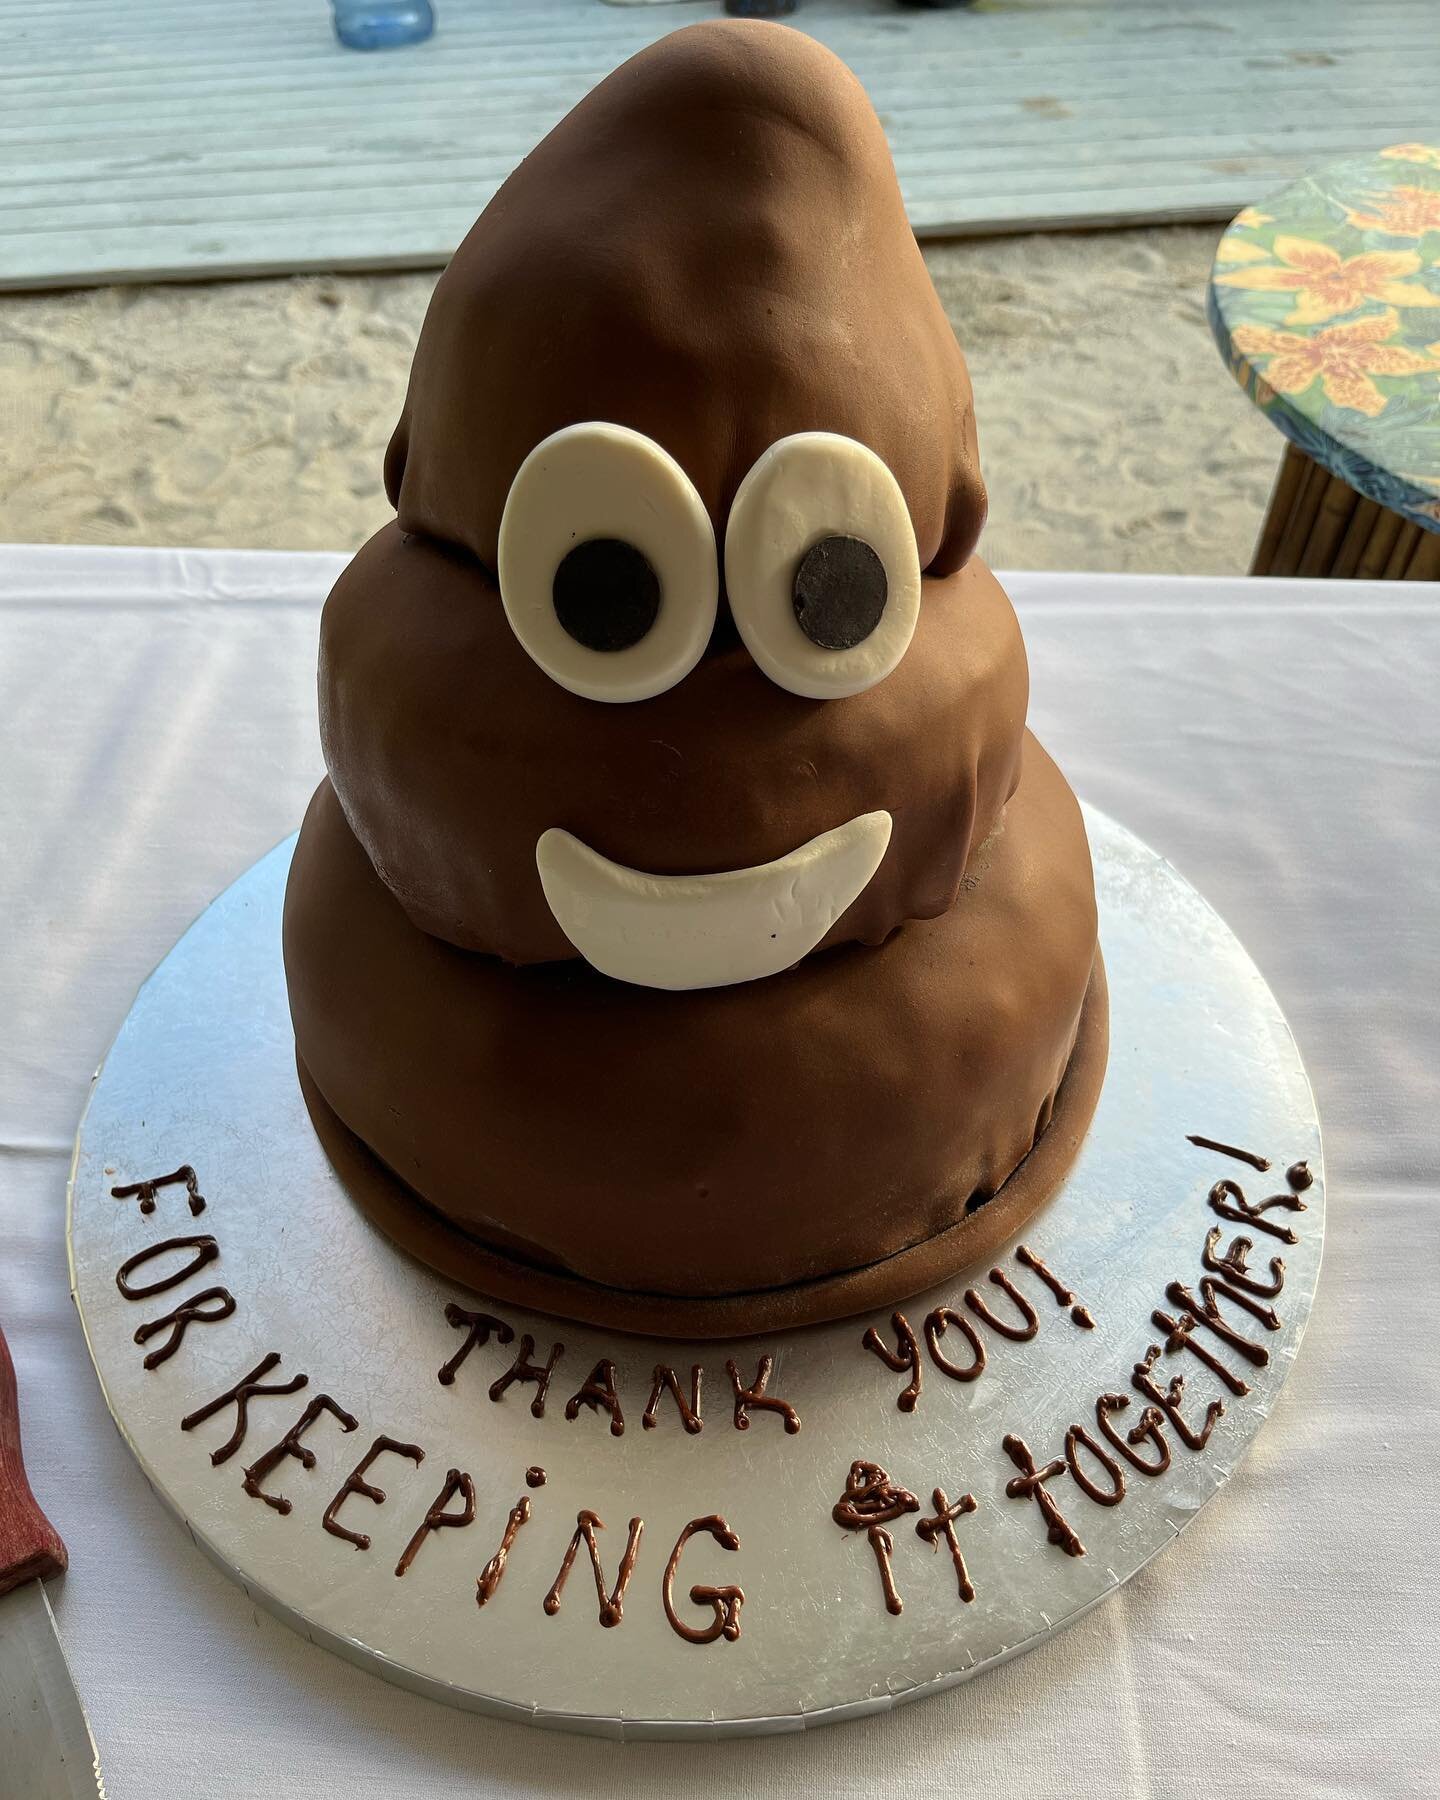 Brrrr it feels like fall 🍁!

To keep you warm, here are some pics from IGIC&rsquo;s recent end-of-summer luau party! Kudos to Lyndsey for another amazing 💩 cake!